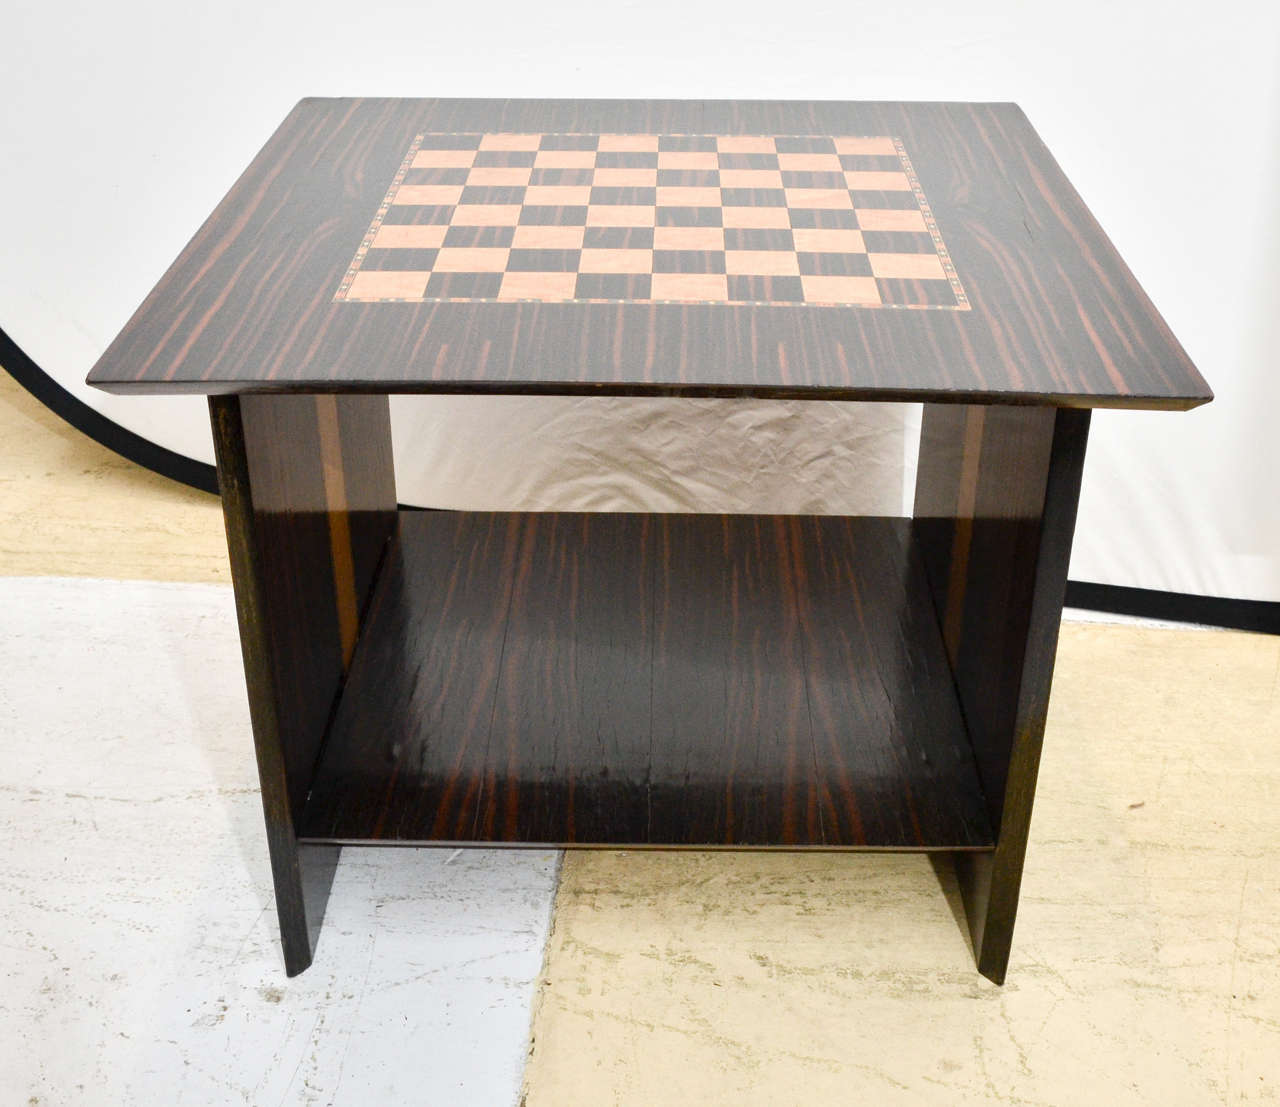 1960'S Middle Eastern Low Square Checkers Games Table. The Checker Board Is Burl Maple & Rosewood Surrounded By .25